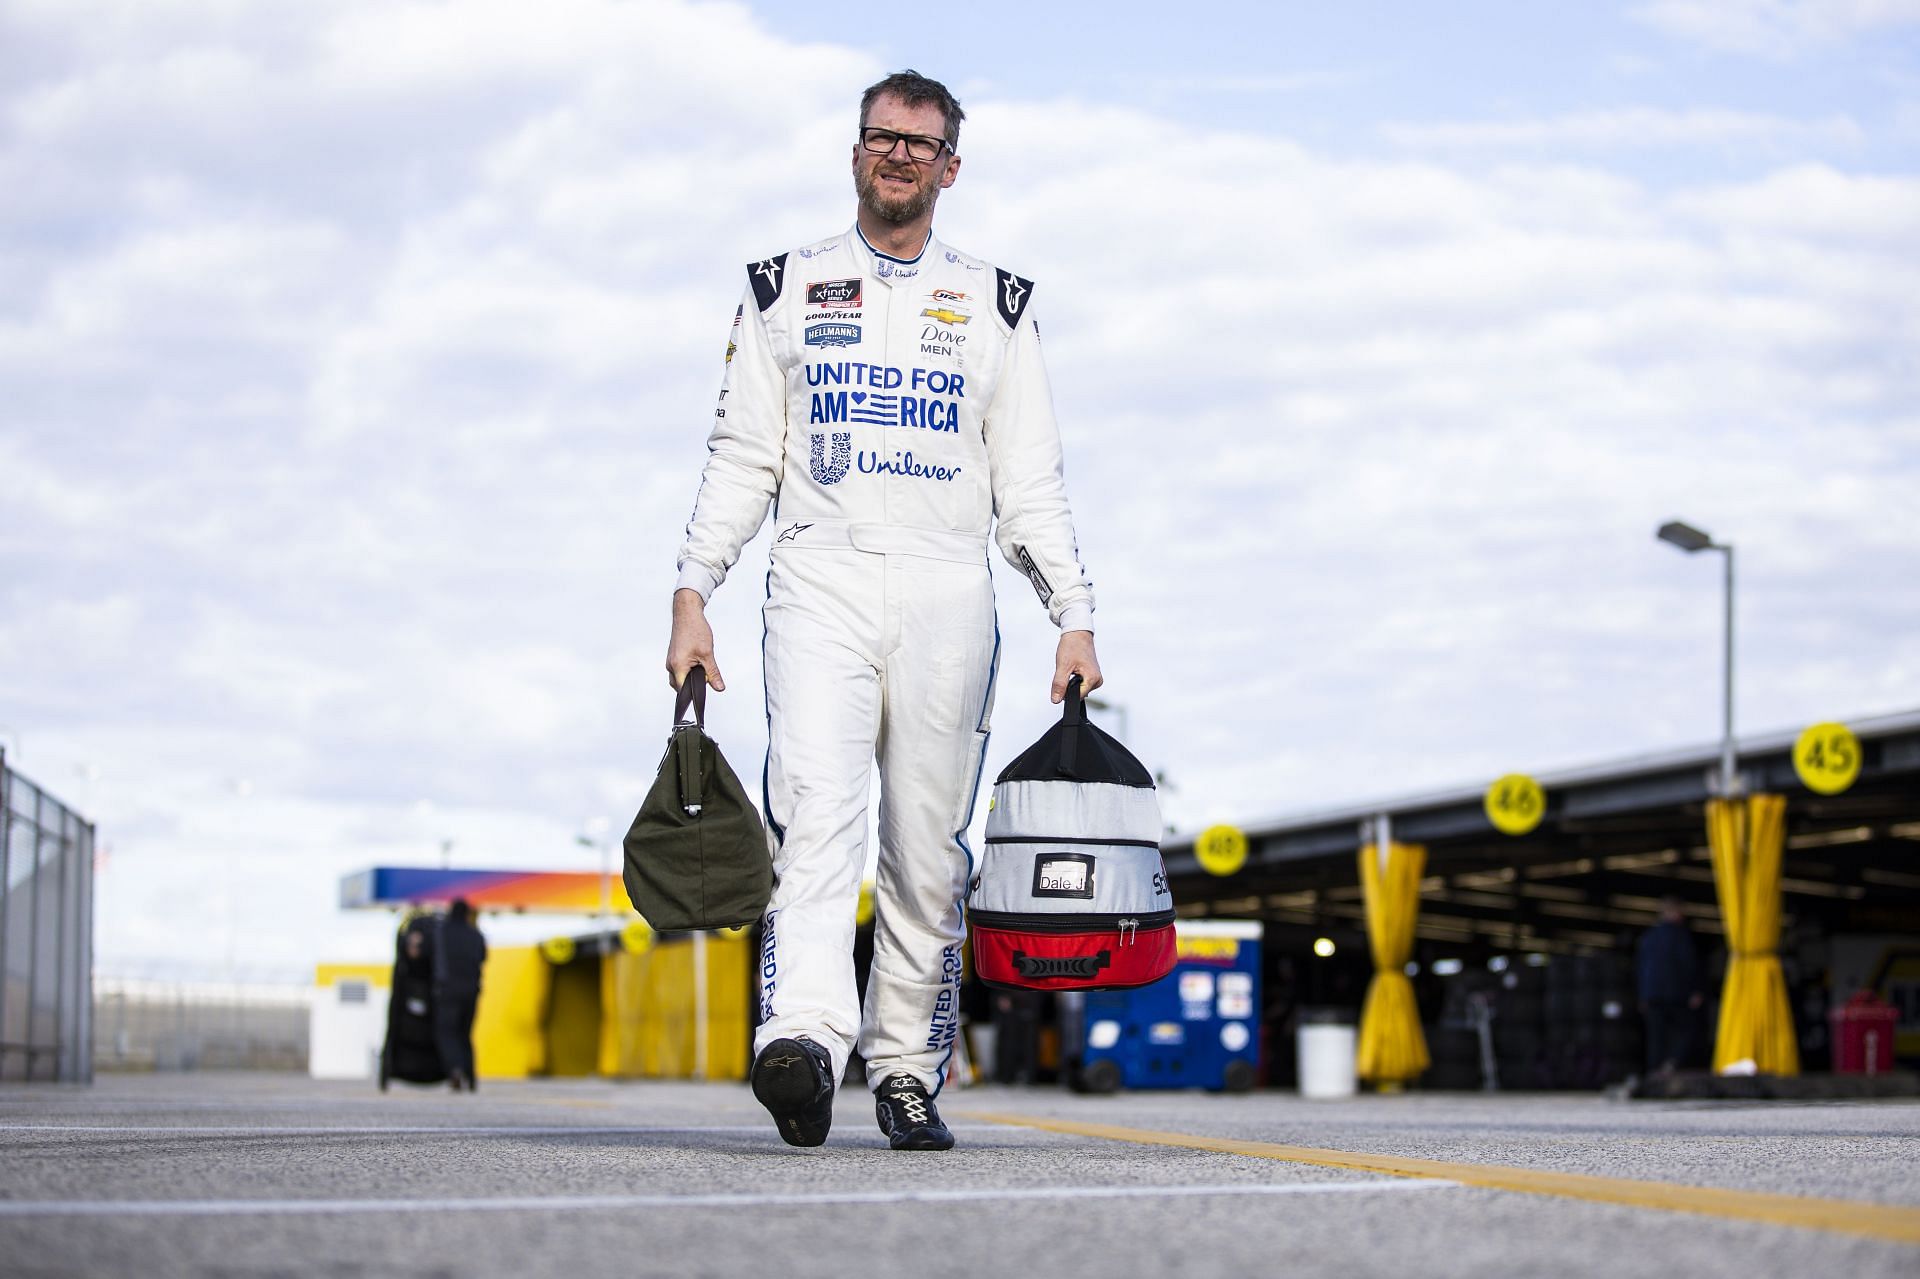 Dale Earnhardt Jr. walks in the garage area during the NASCAR Next Gen Test at Daytona International Speedway on January 12, 2022 in Daytona Beach, Florida. (Photo by James Gilbert/Getty Images)